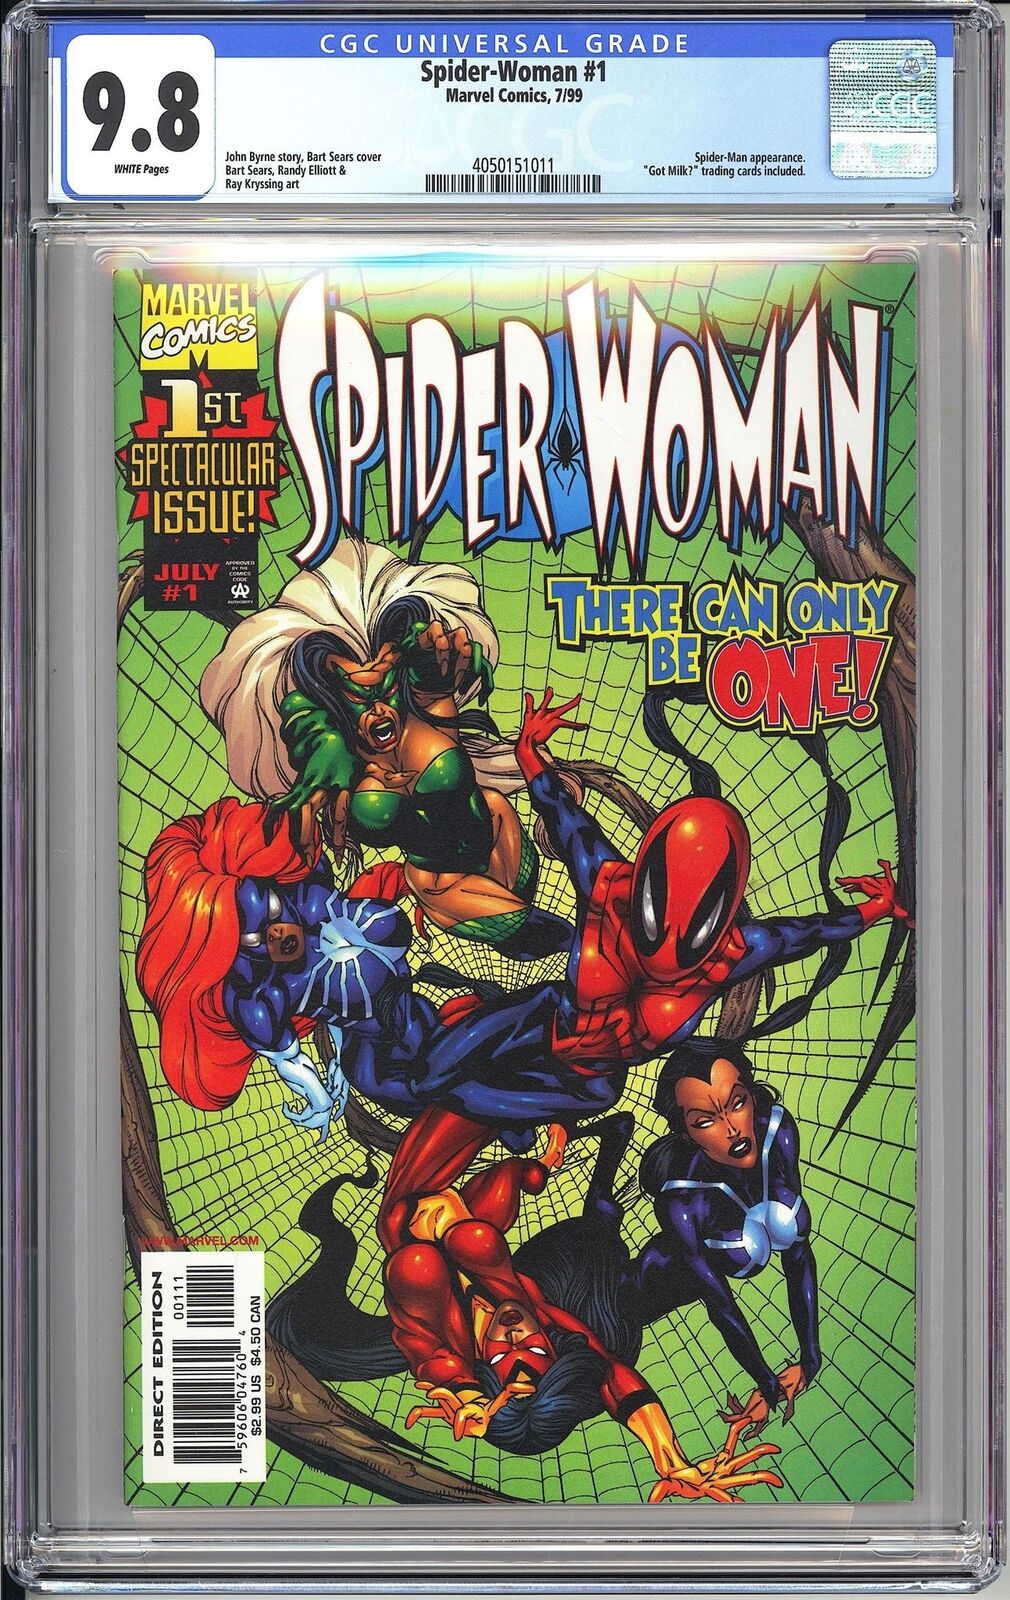 Spider-Woman #1 CGC 9.8 1999 4050151011 There Can Be Only One 1st Issue KEY